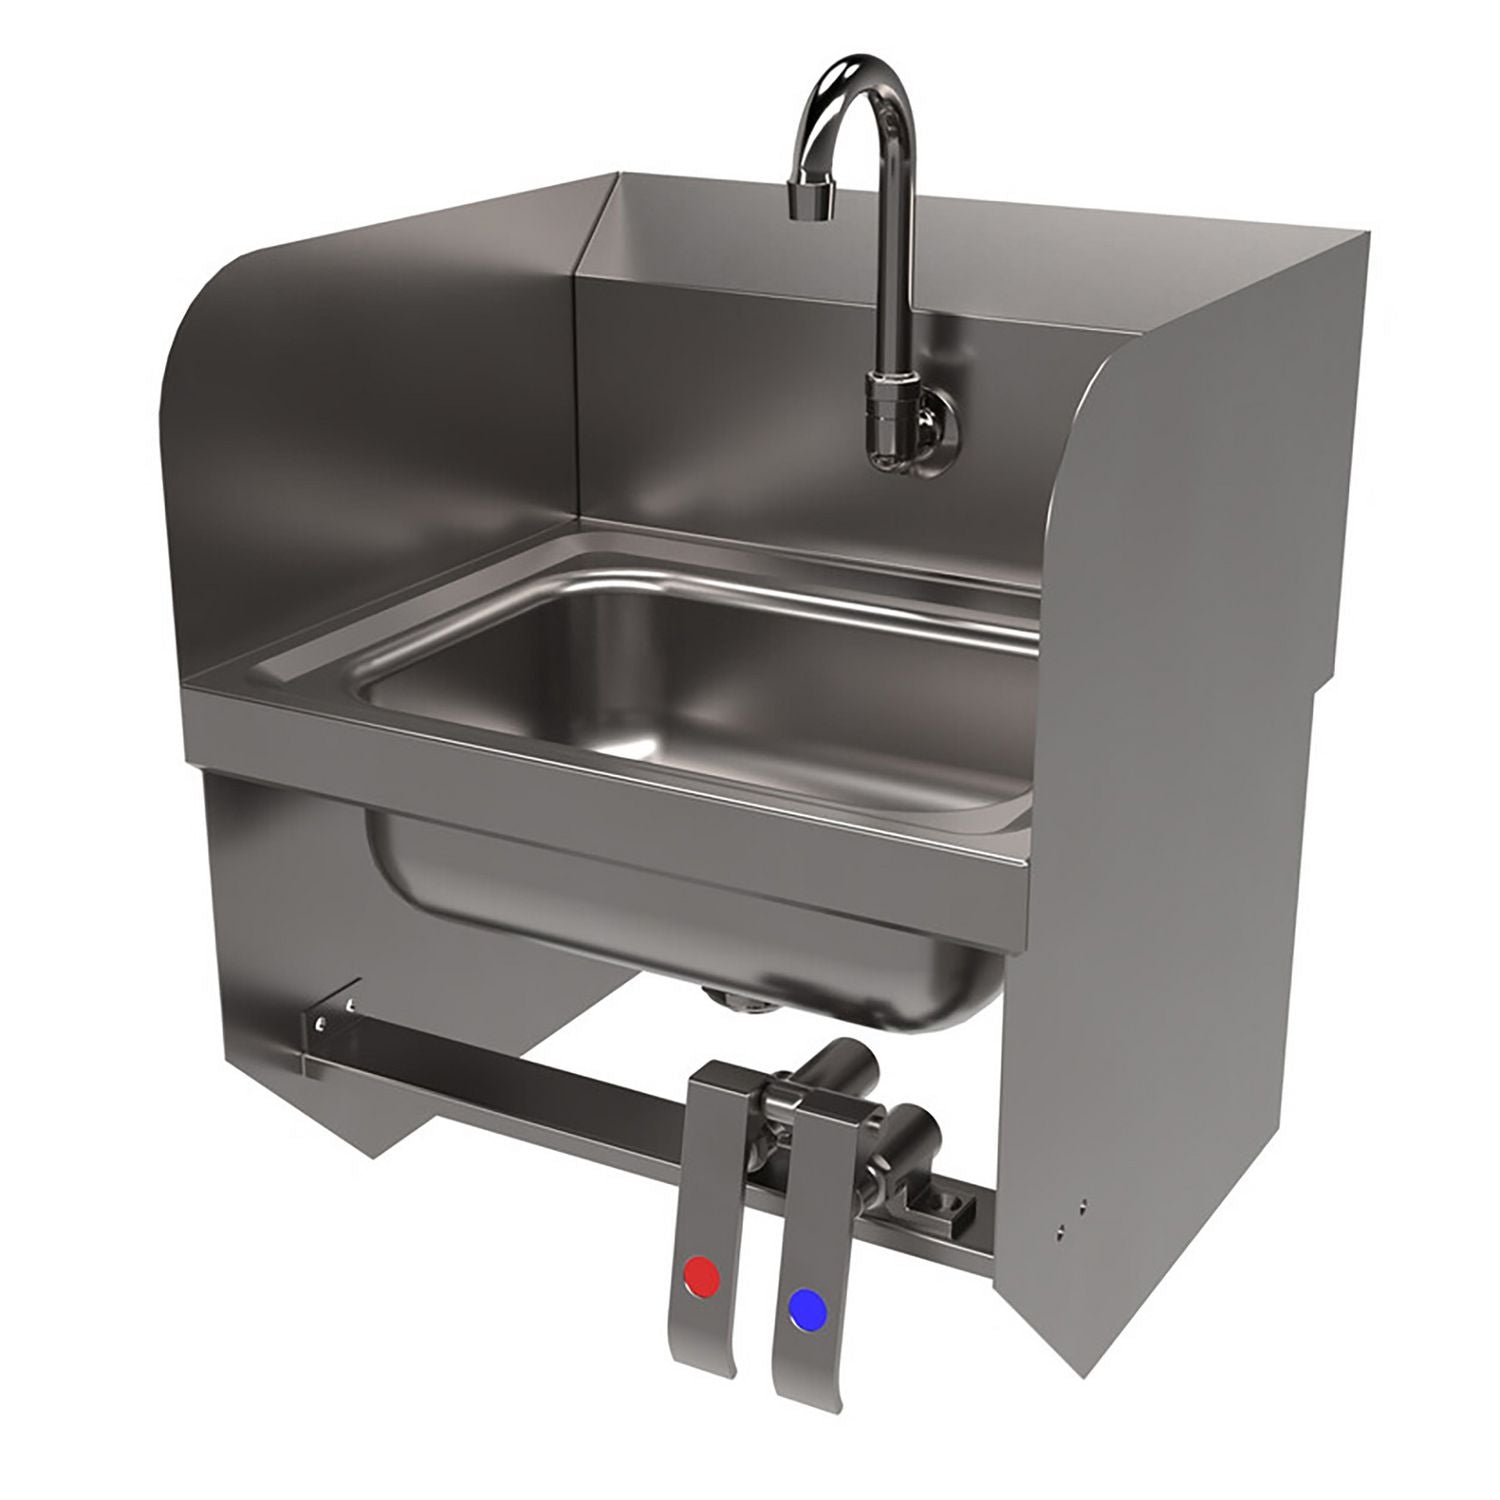 stainless-steel-hand-sink-with-side-splashes-14-l-x-10-w-x-5-d-ships-in-4-6-business-days_bkehsw14101sbkp - 4